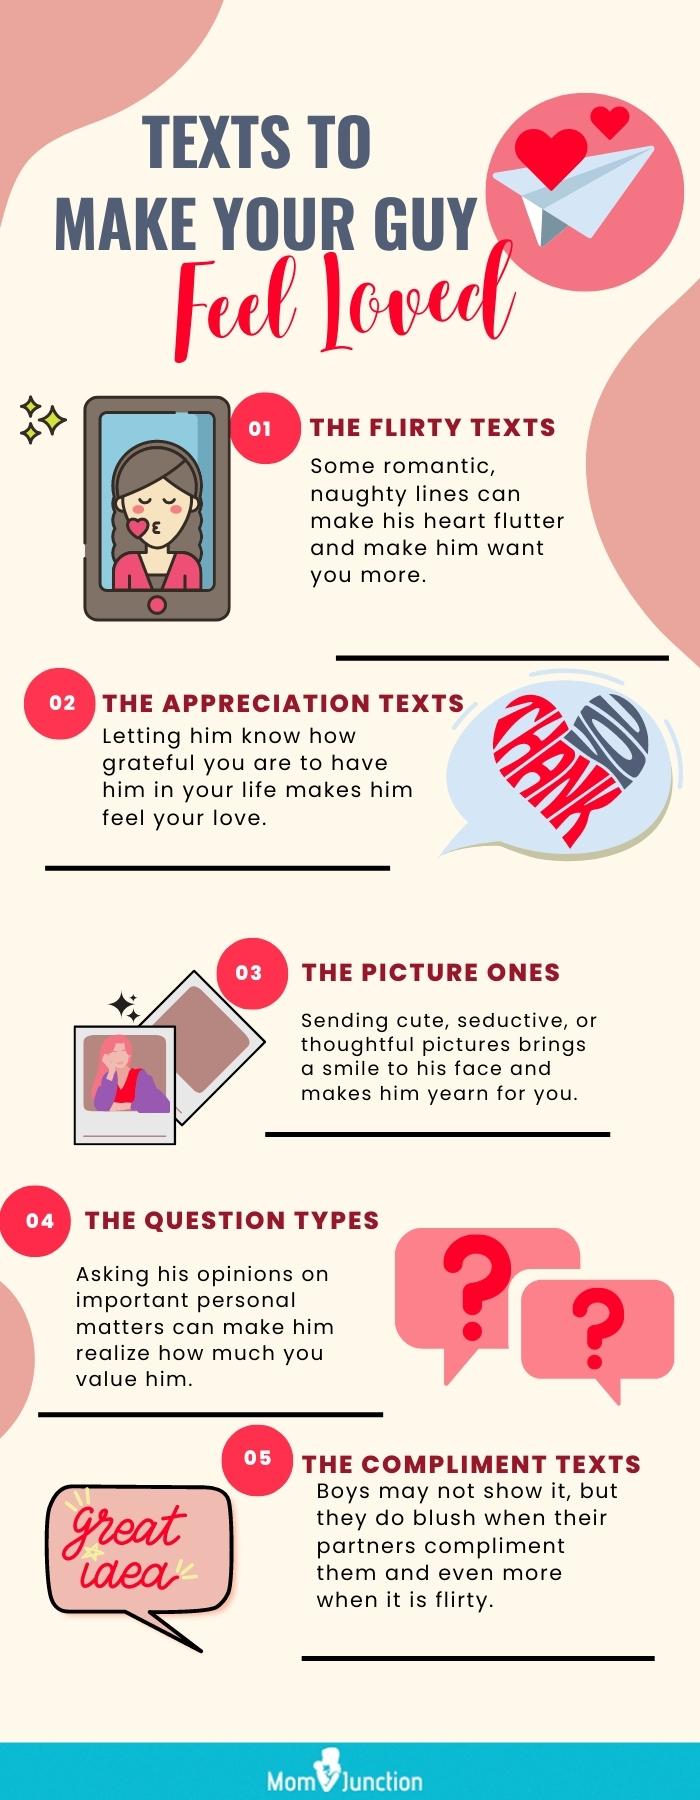 texts to make your guy feel loved (infographic)